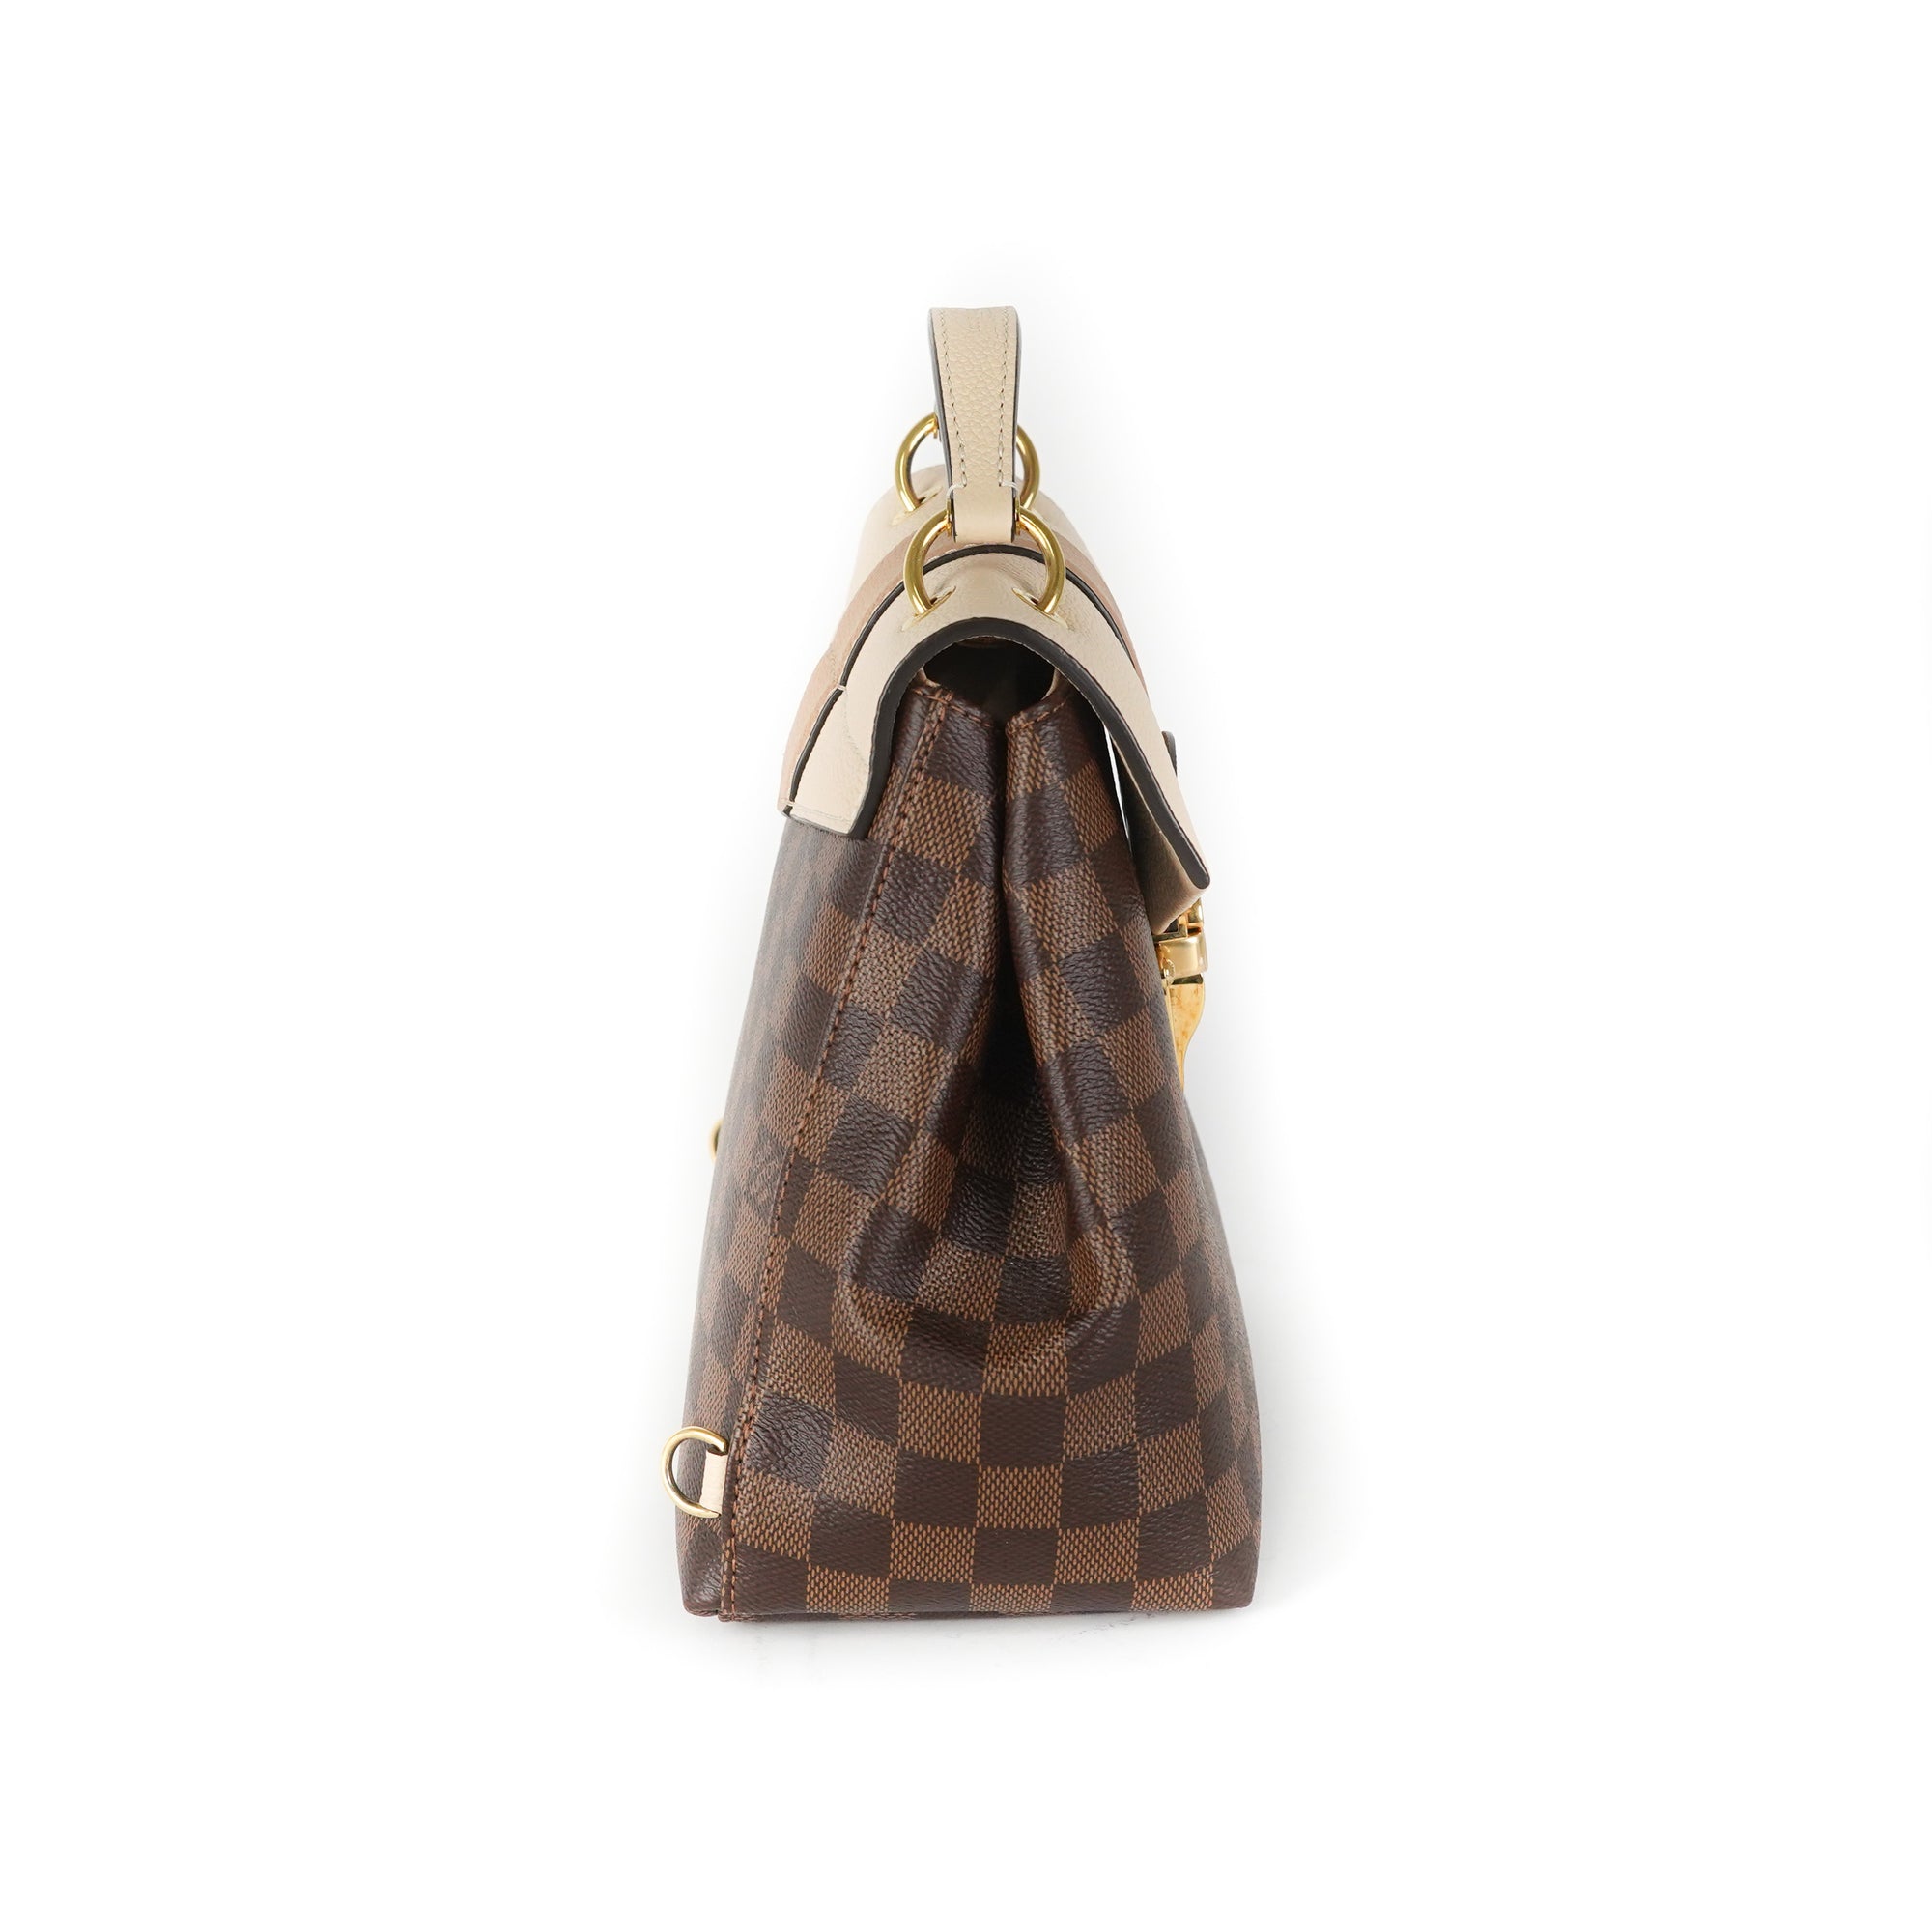 LOUIS VUITTON CLAPTON BACKPACK REVIEW, PROS/CONS, MODELING SHOTS 